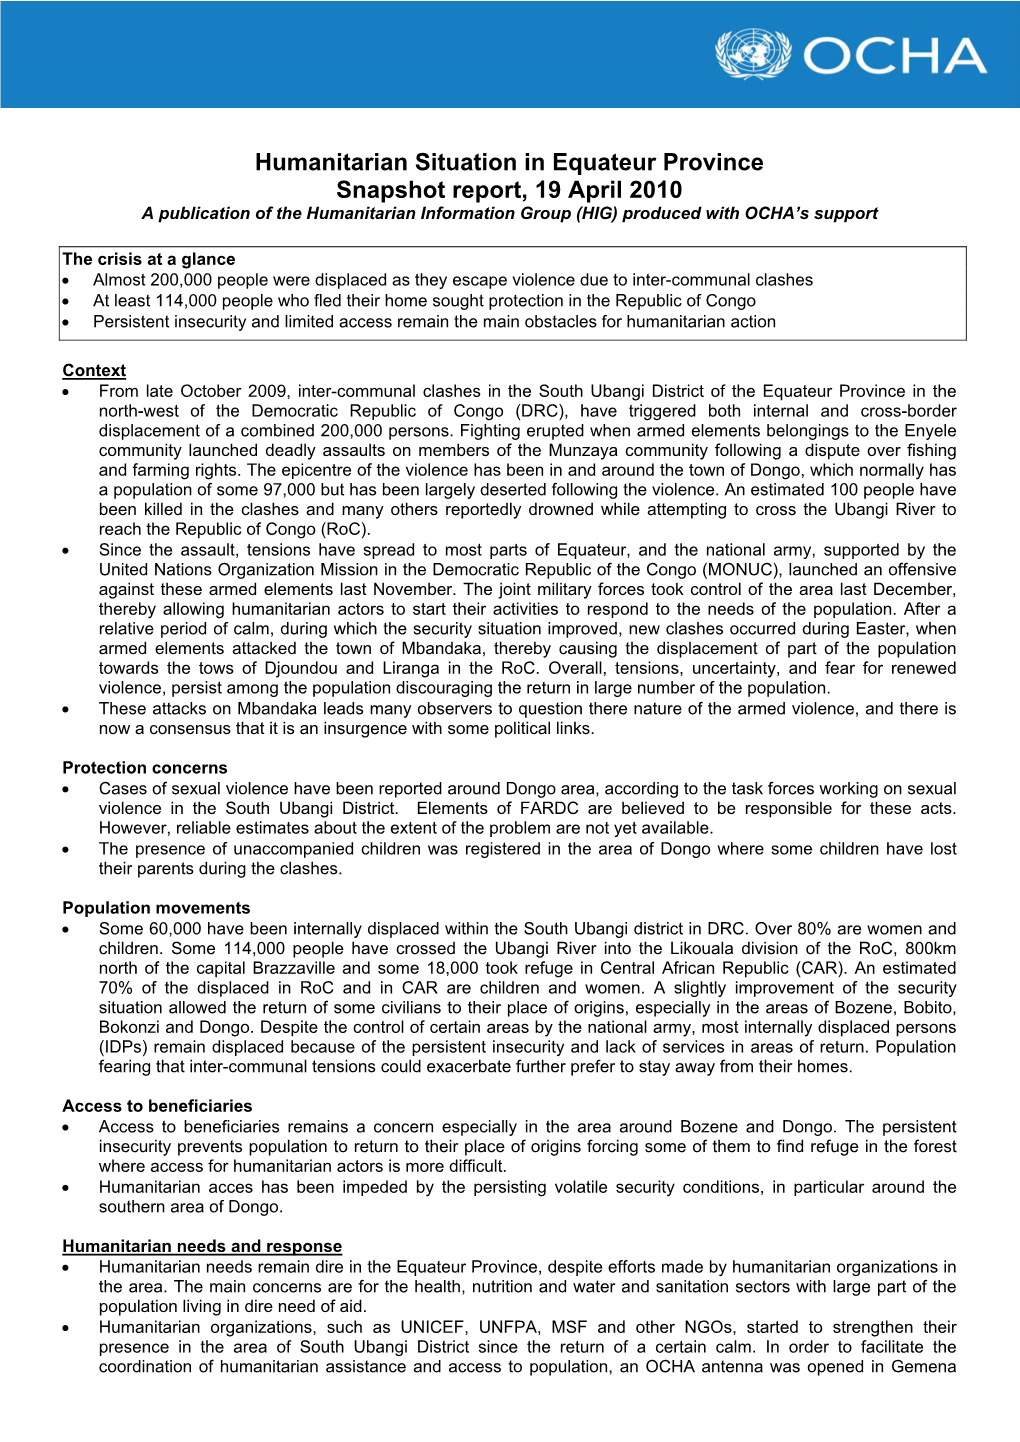 Humanitarian Situation in Equateur Province Snapshot Report, 19 April 2010 a Publication of the Humanitarian Information Group (HIG) Produced with OCHA’S Support